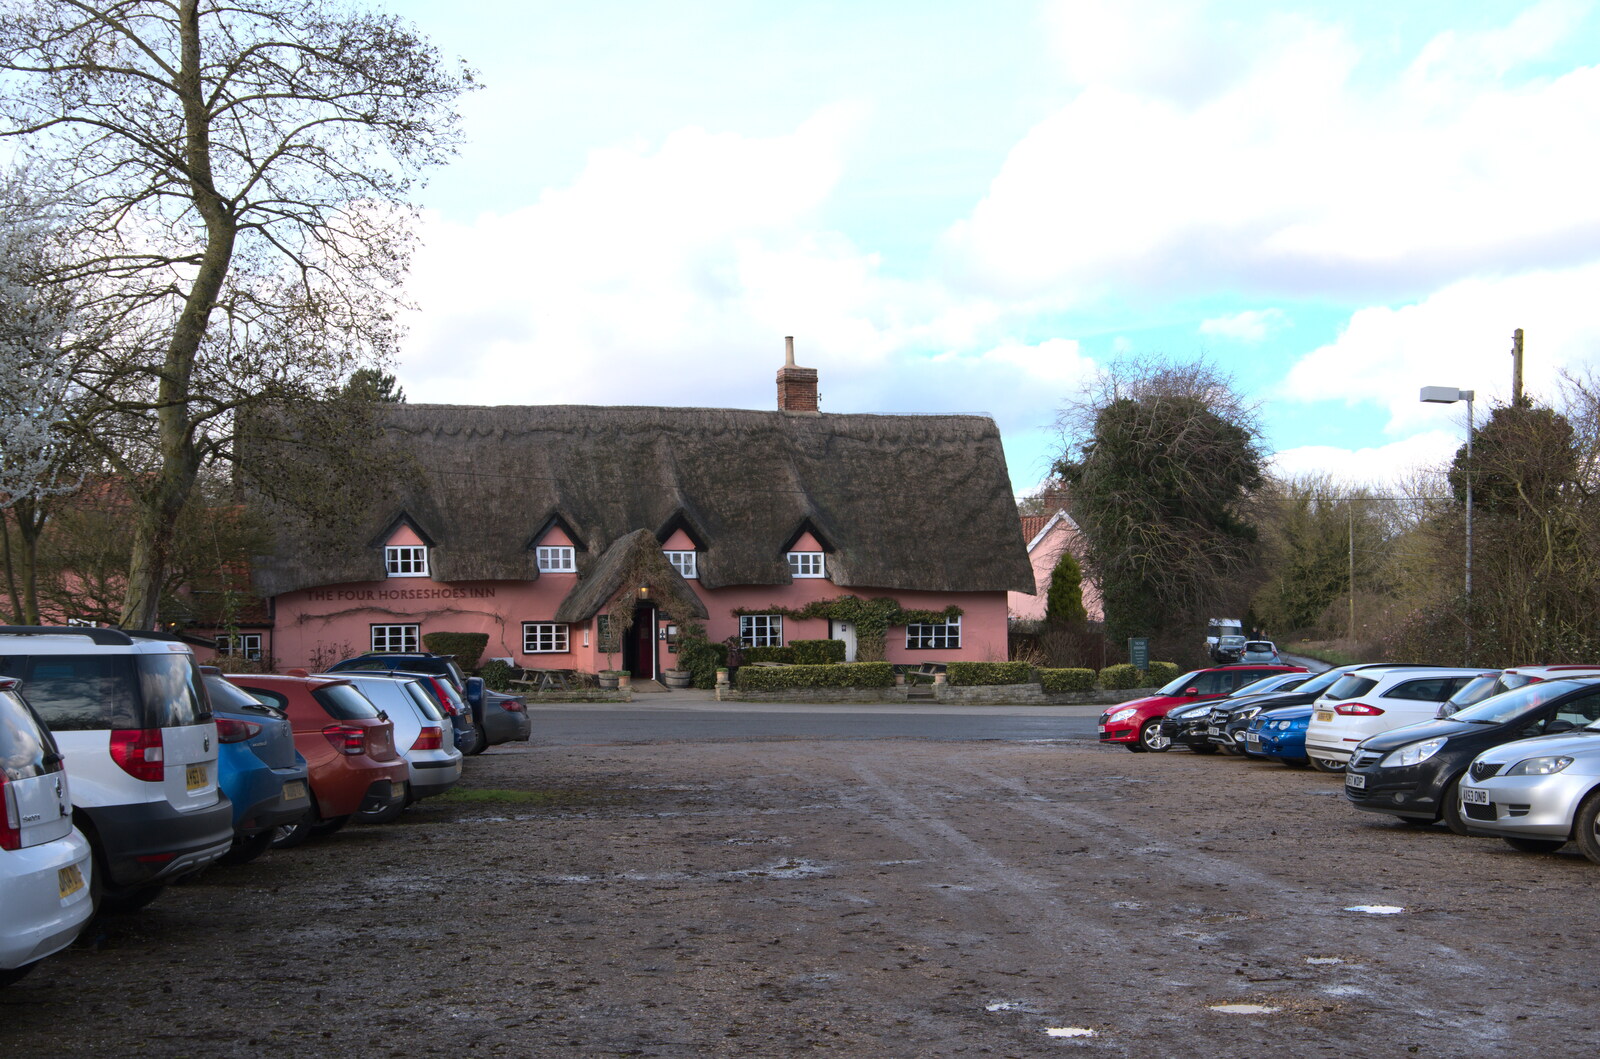 The Four Horseshoes pub in Thornham from Sunday Lunch and a SwiftKey Trip to Nando's, Thornham and Bayswater - 22nd February 2020